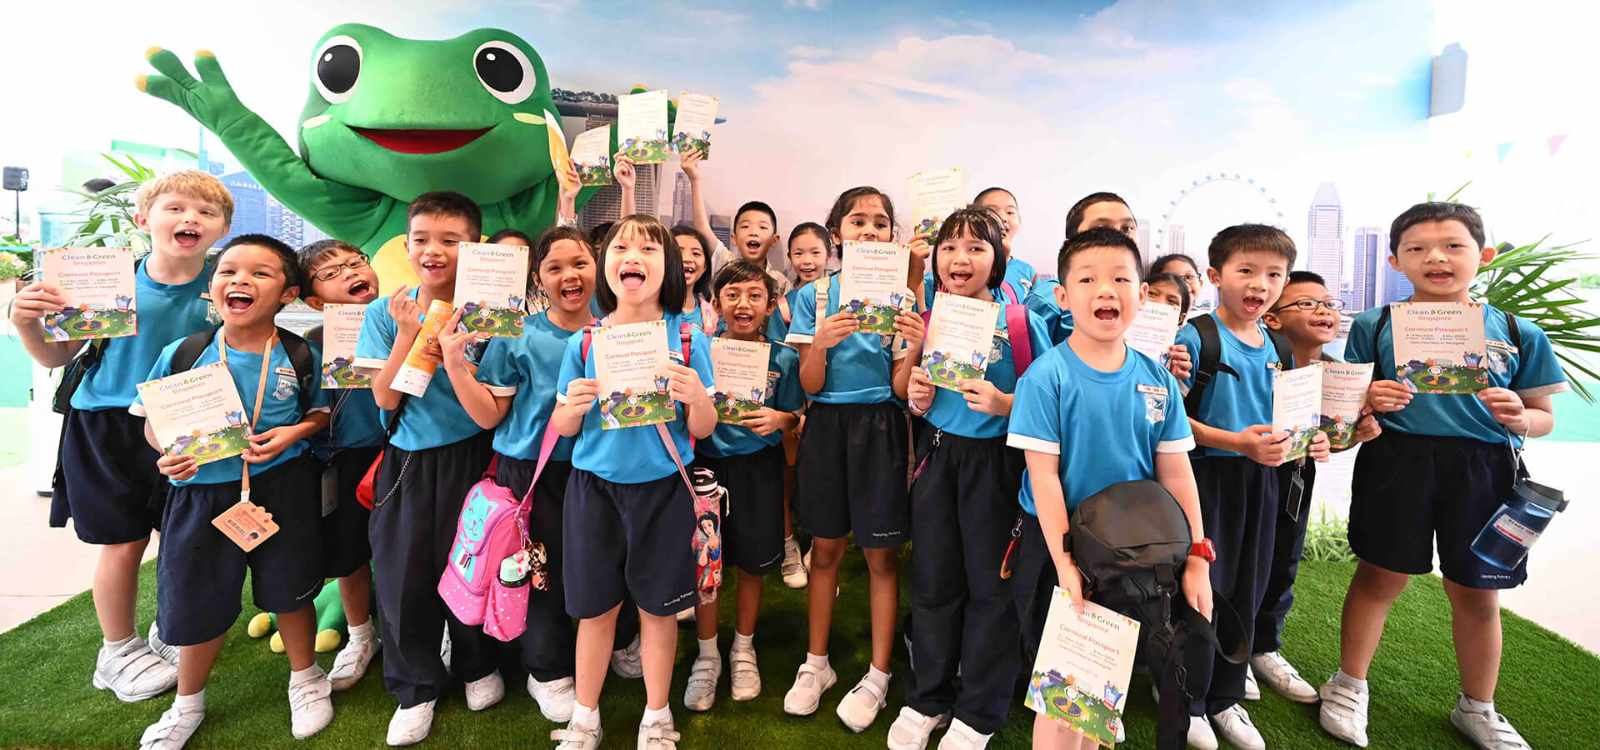 Clean-and-Green-Singapore-Main-Carnival-2019---National-Environment-Agency-02